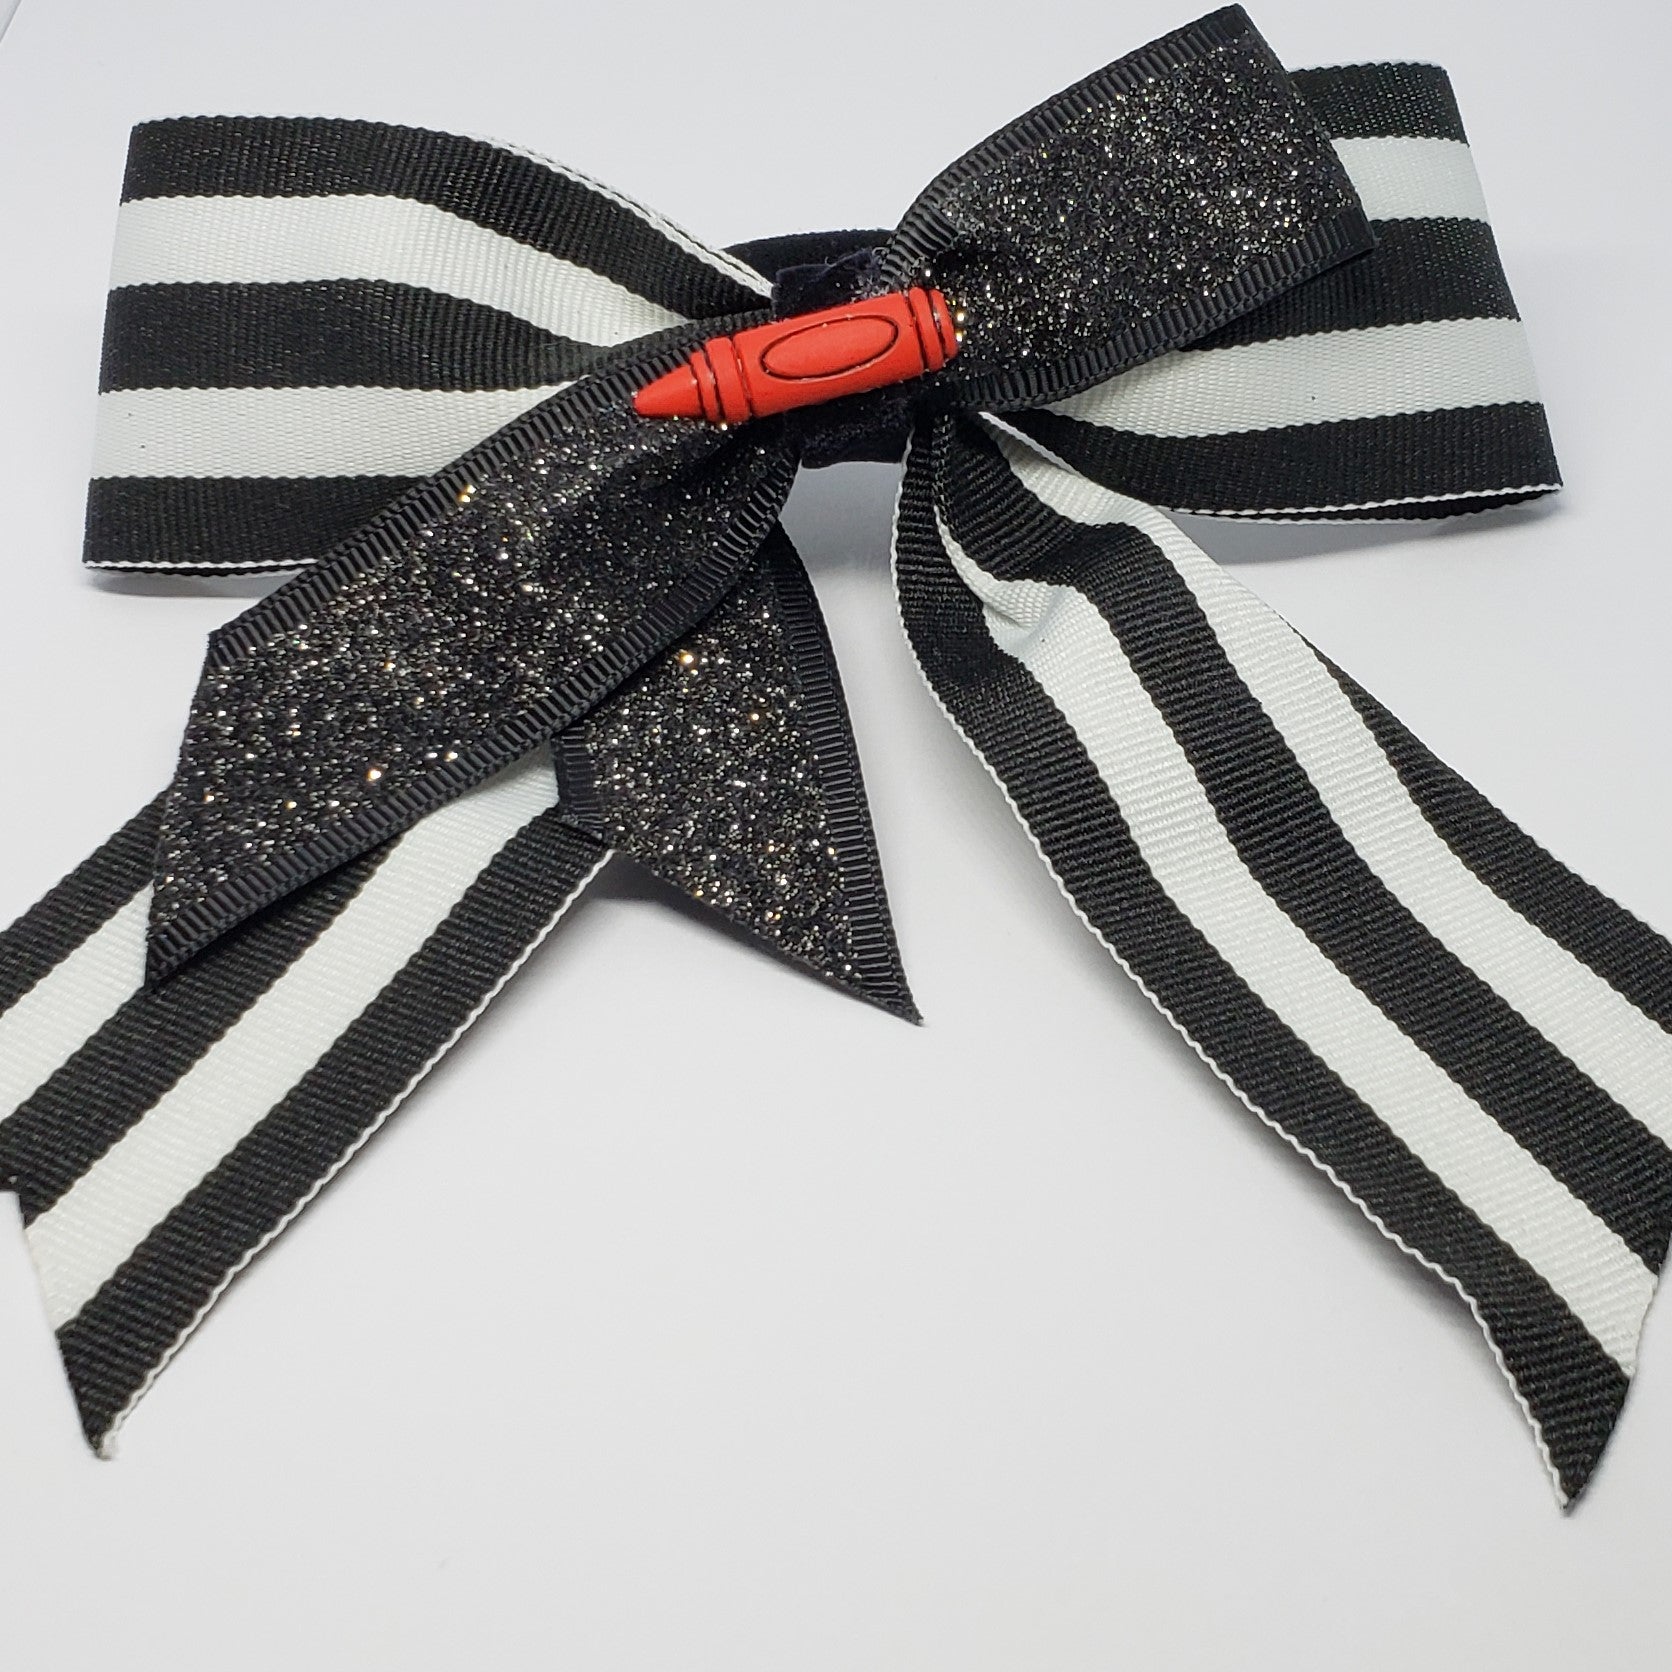 Cassidy-Dior Uniform Cheer Style Bow in Black, White & Red - Houzz of DVA Boutique